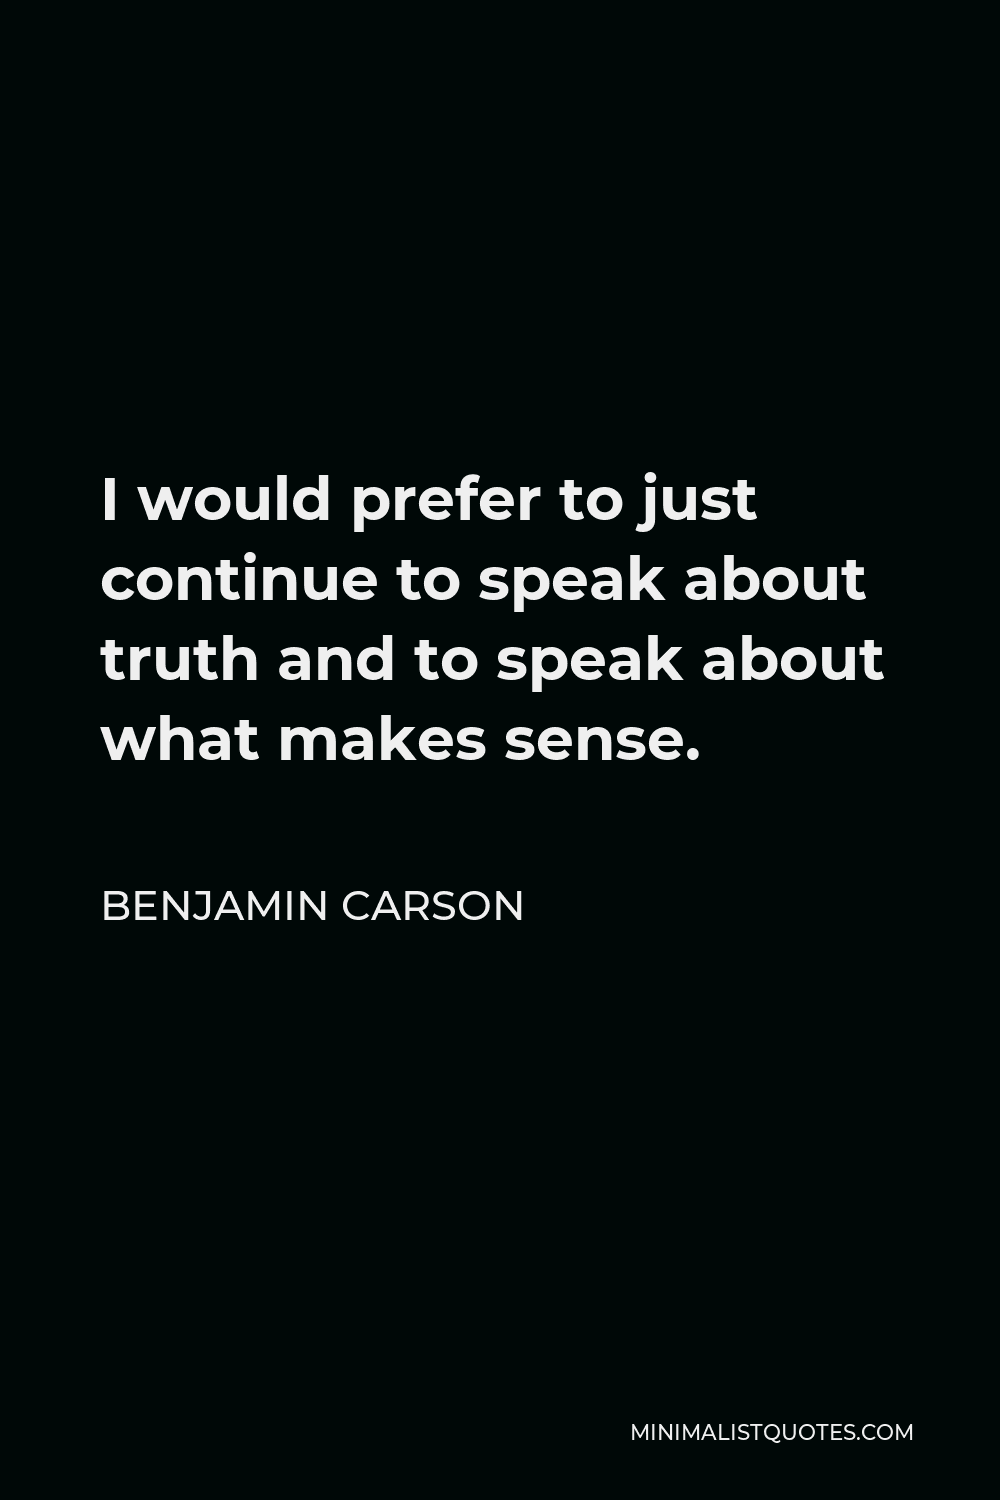 Benjamin Carson Quote - I would prefer to just continue to speak about truth and to speak about what makes sense.